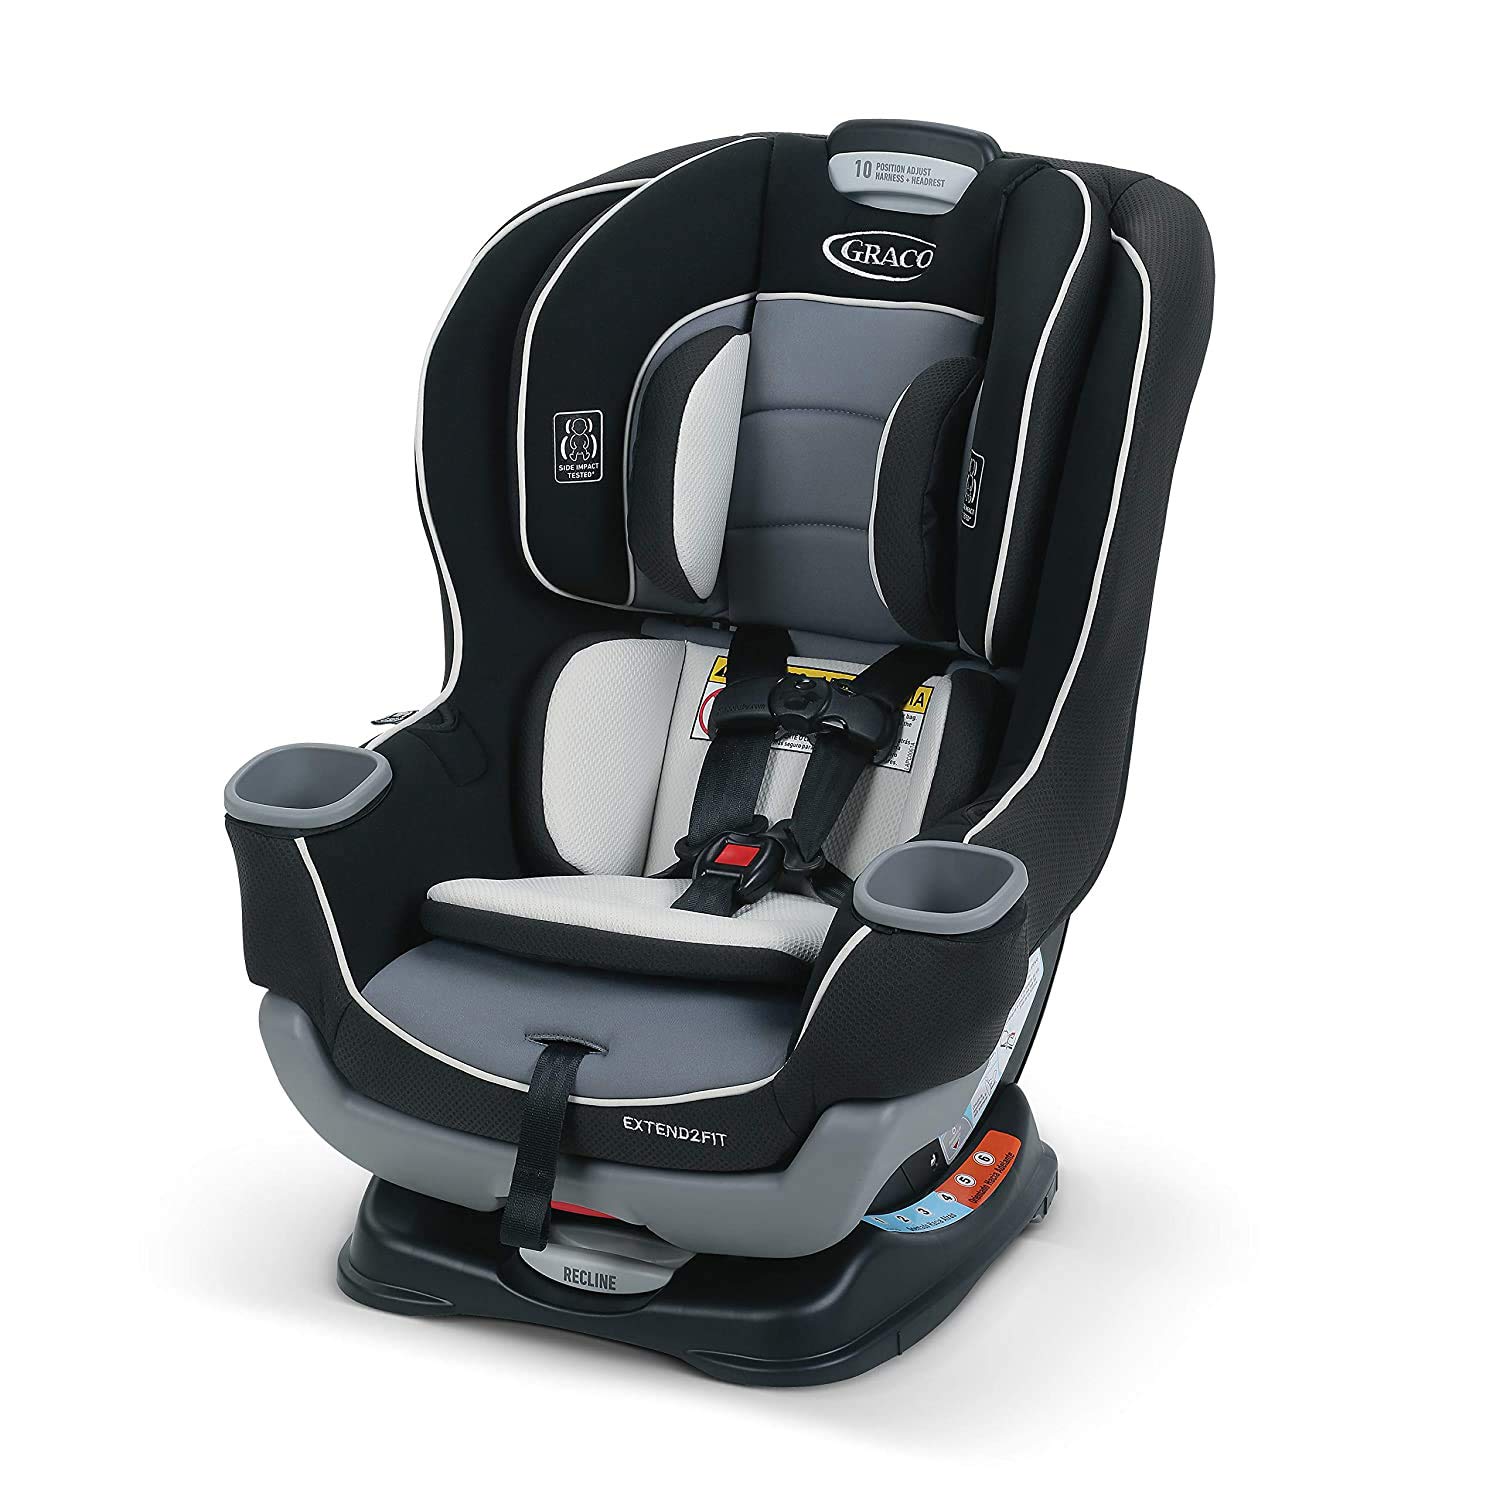 Graco Extend2Fit 3-in-1 Car Seat (Extend2Fit, Gotham)